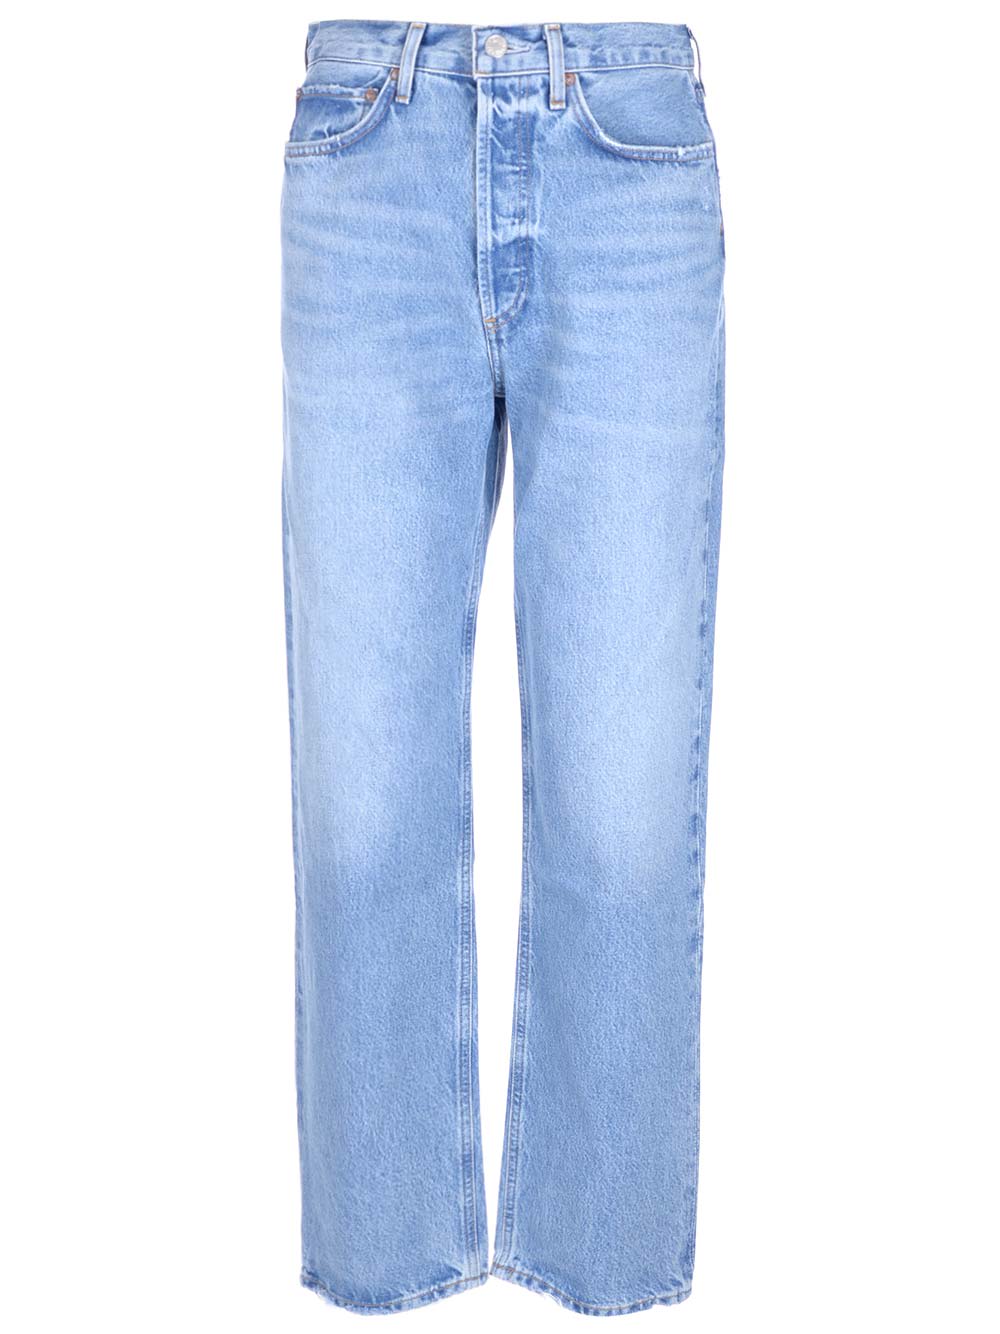 AGOLDE 90S-INSPIRED JEANS